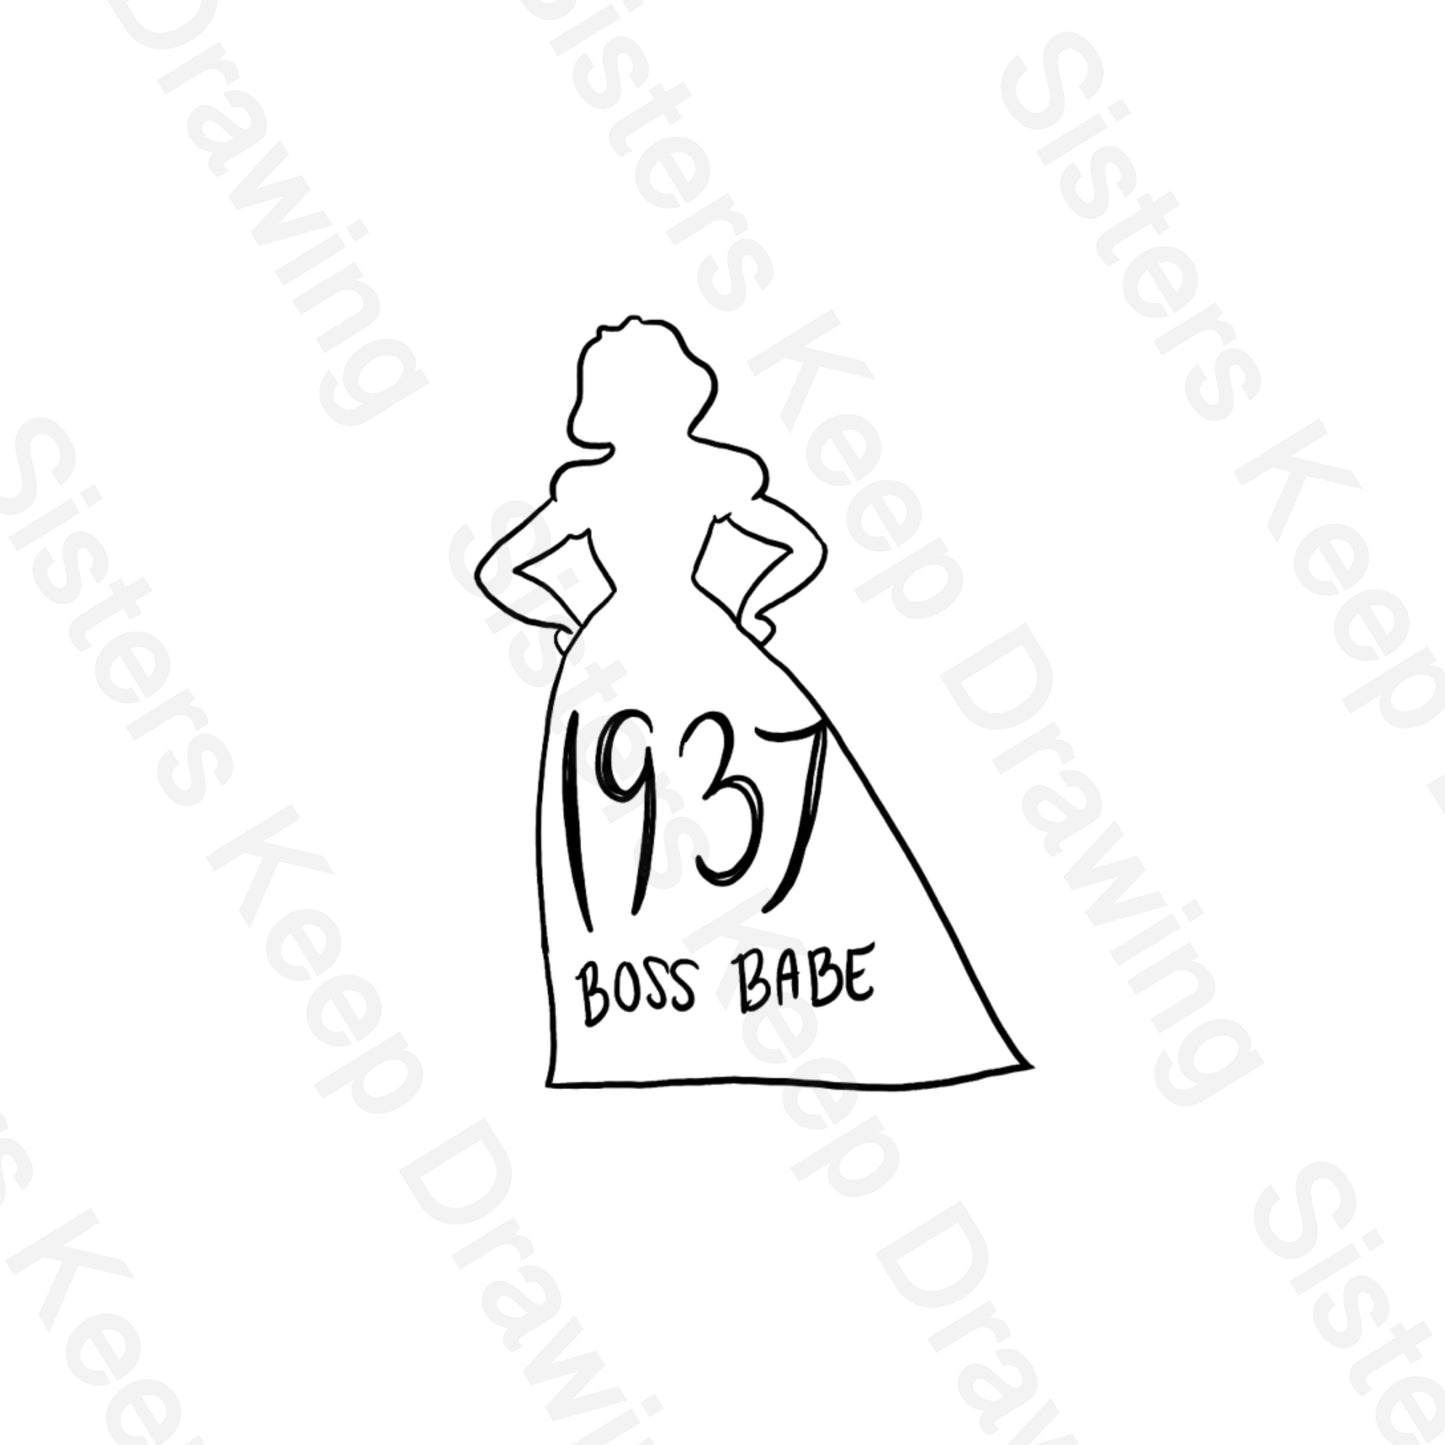 1937 Boss Babe - Snow White inspired- Transparent Tattoo Permission PNG